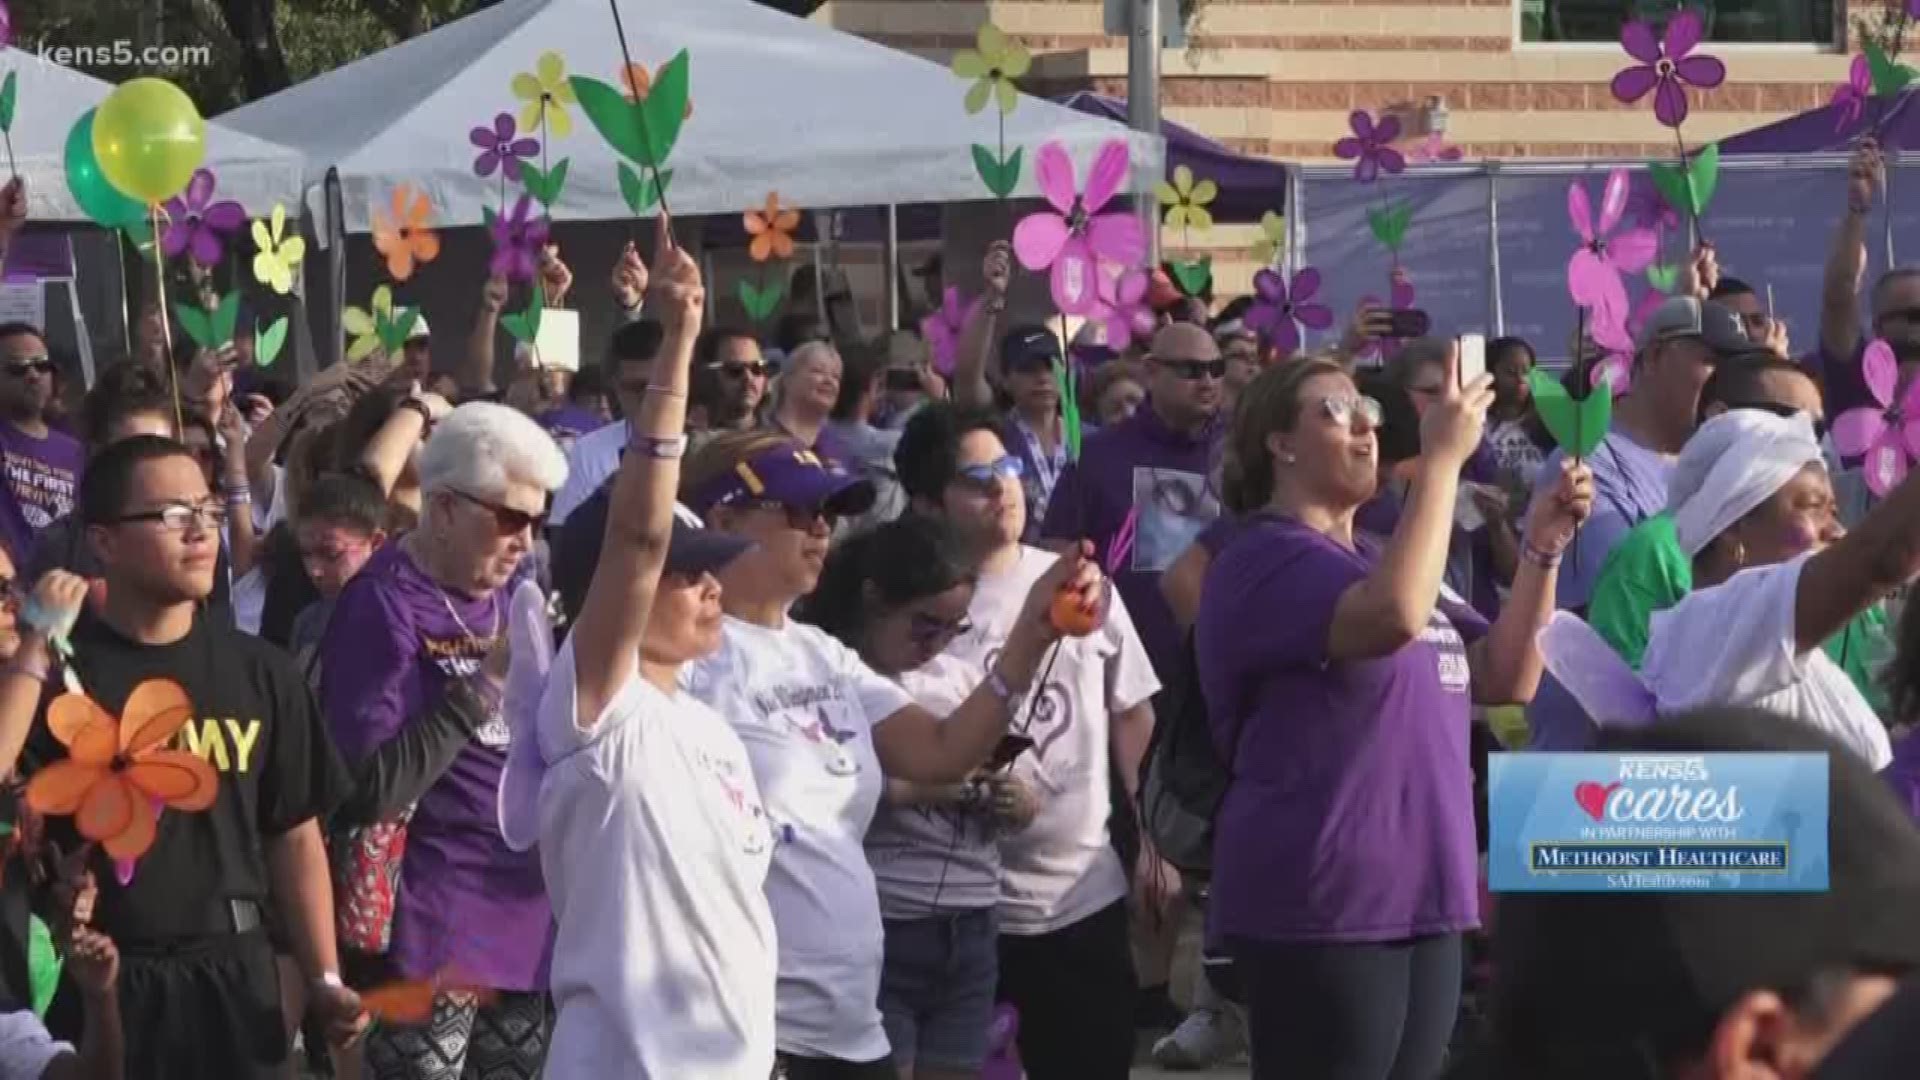 More than 4,000 people registered for the 2019 walk, fighting for a cure and raising money for resources, research and awareness.